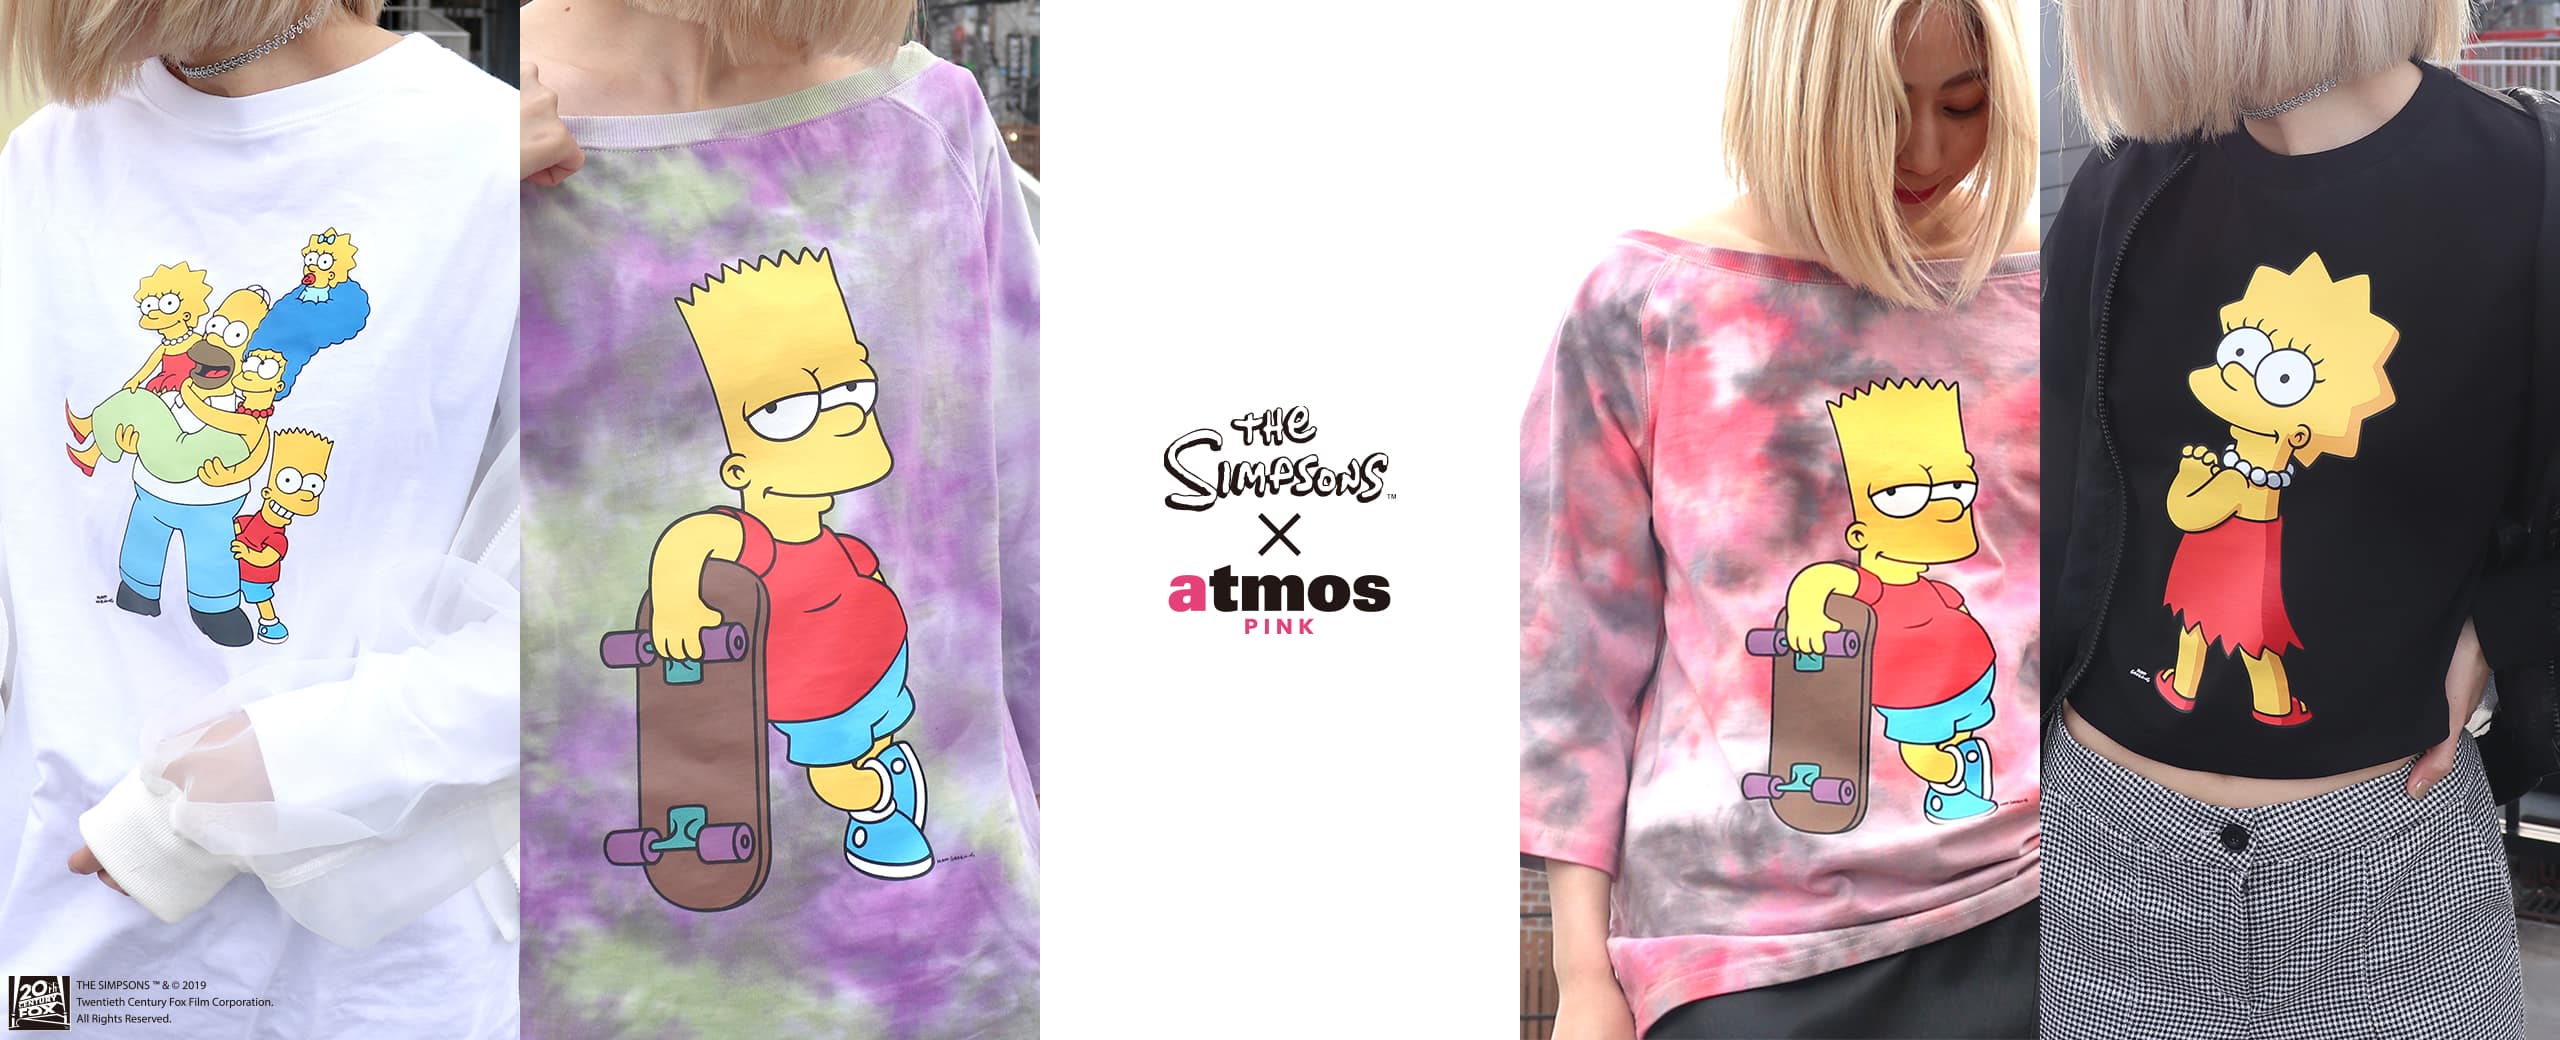 "The Simpsons × atmos pink"